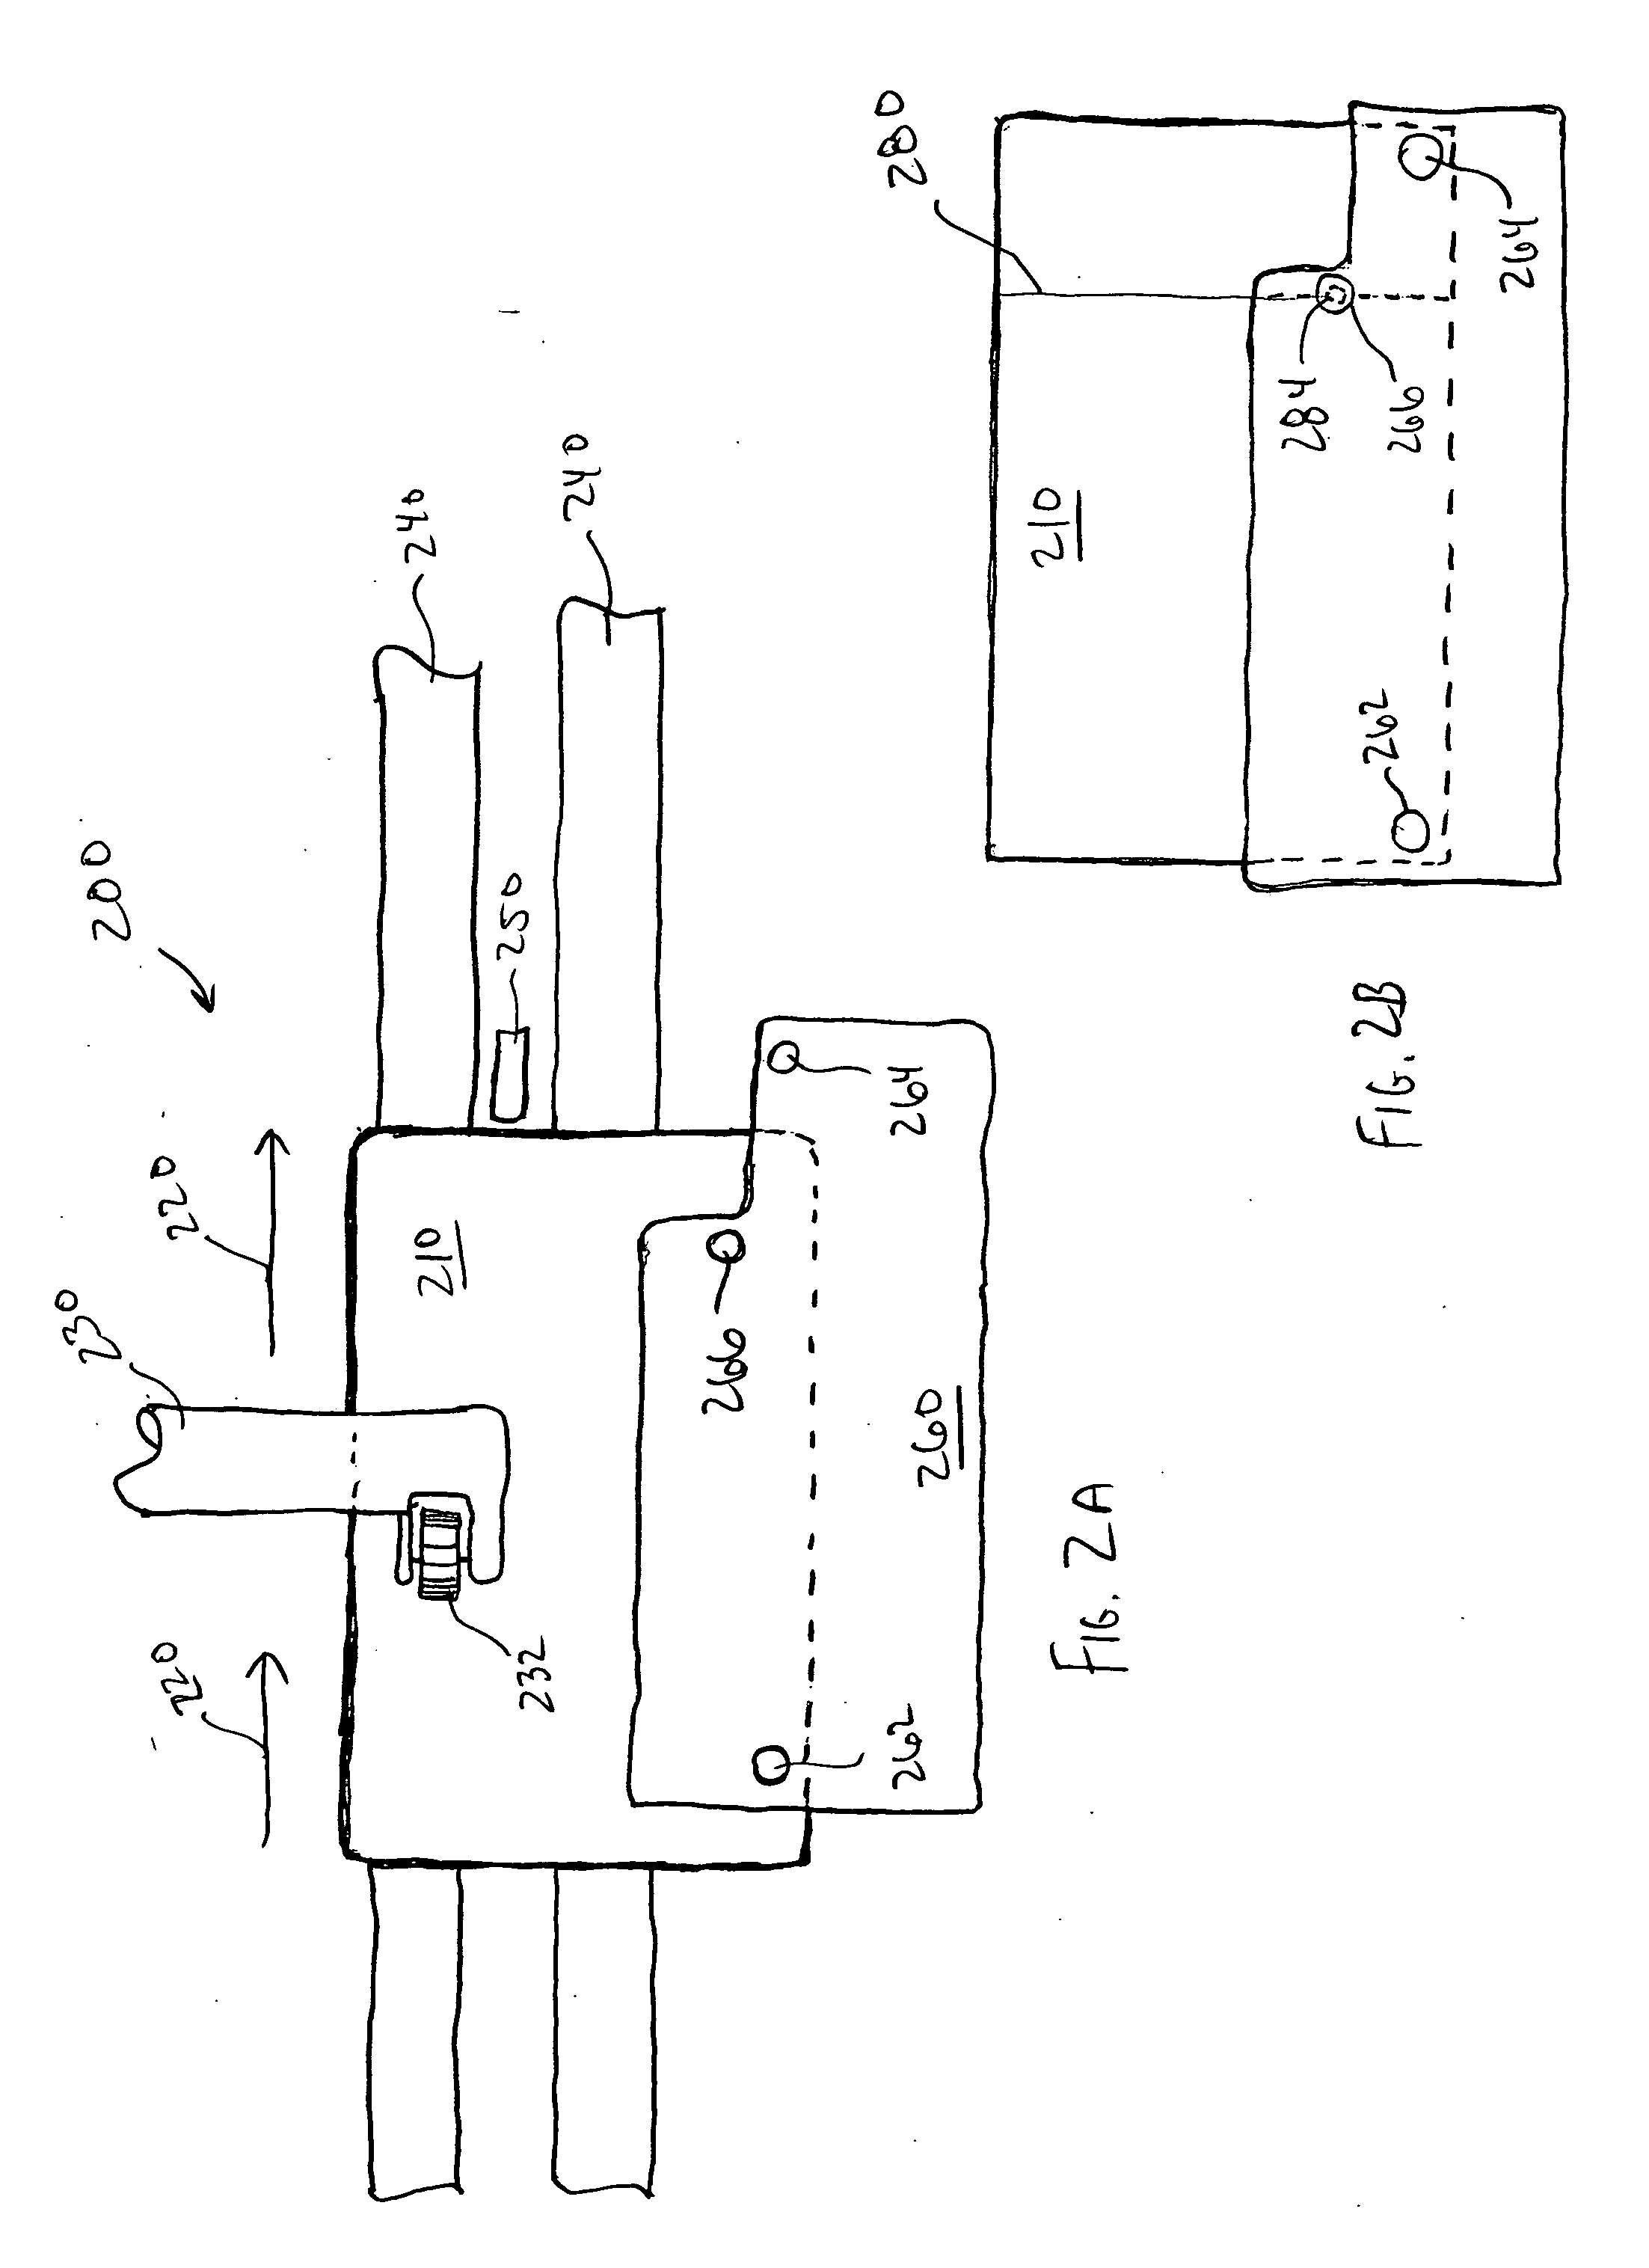 Mini card reader systems and methods